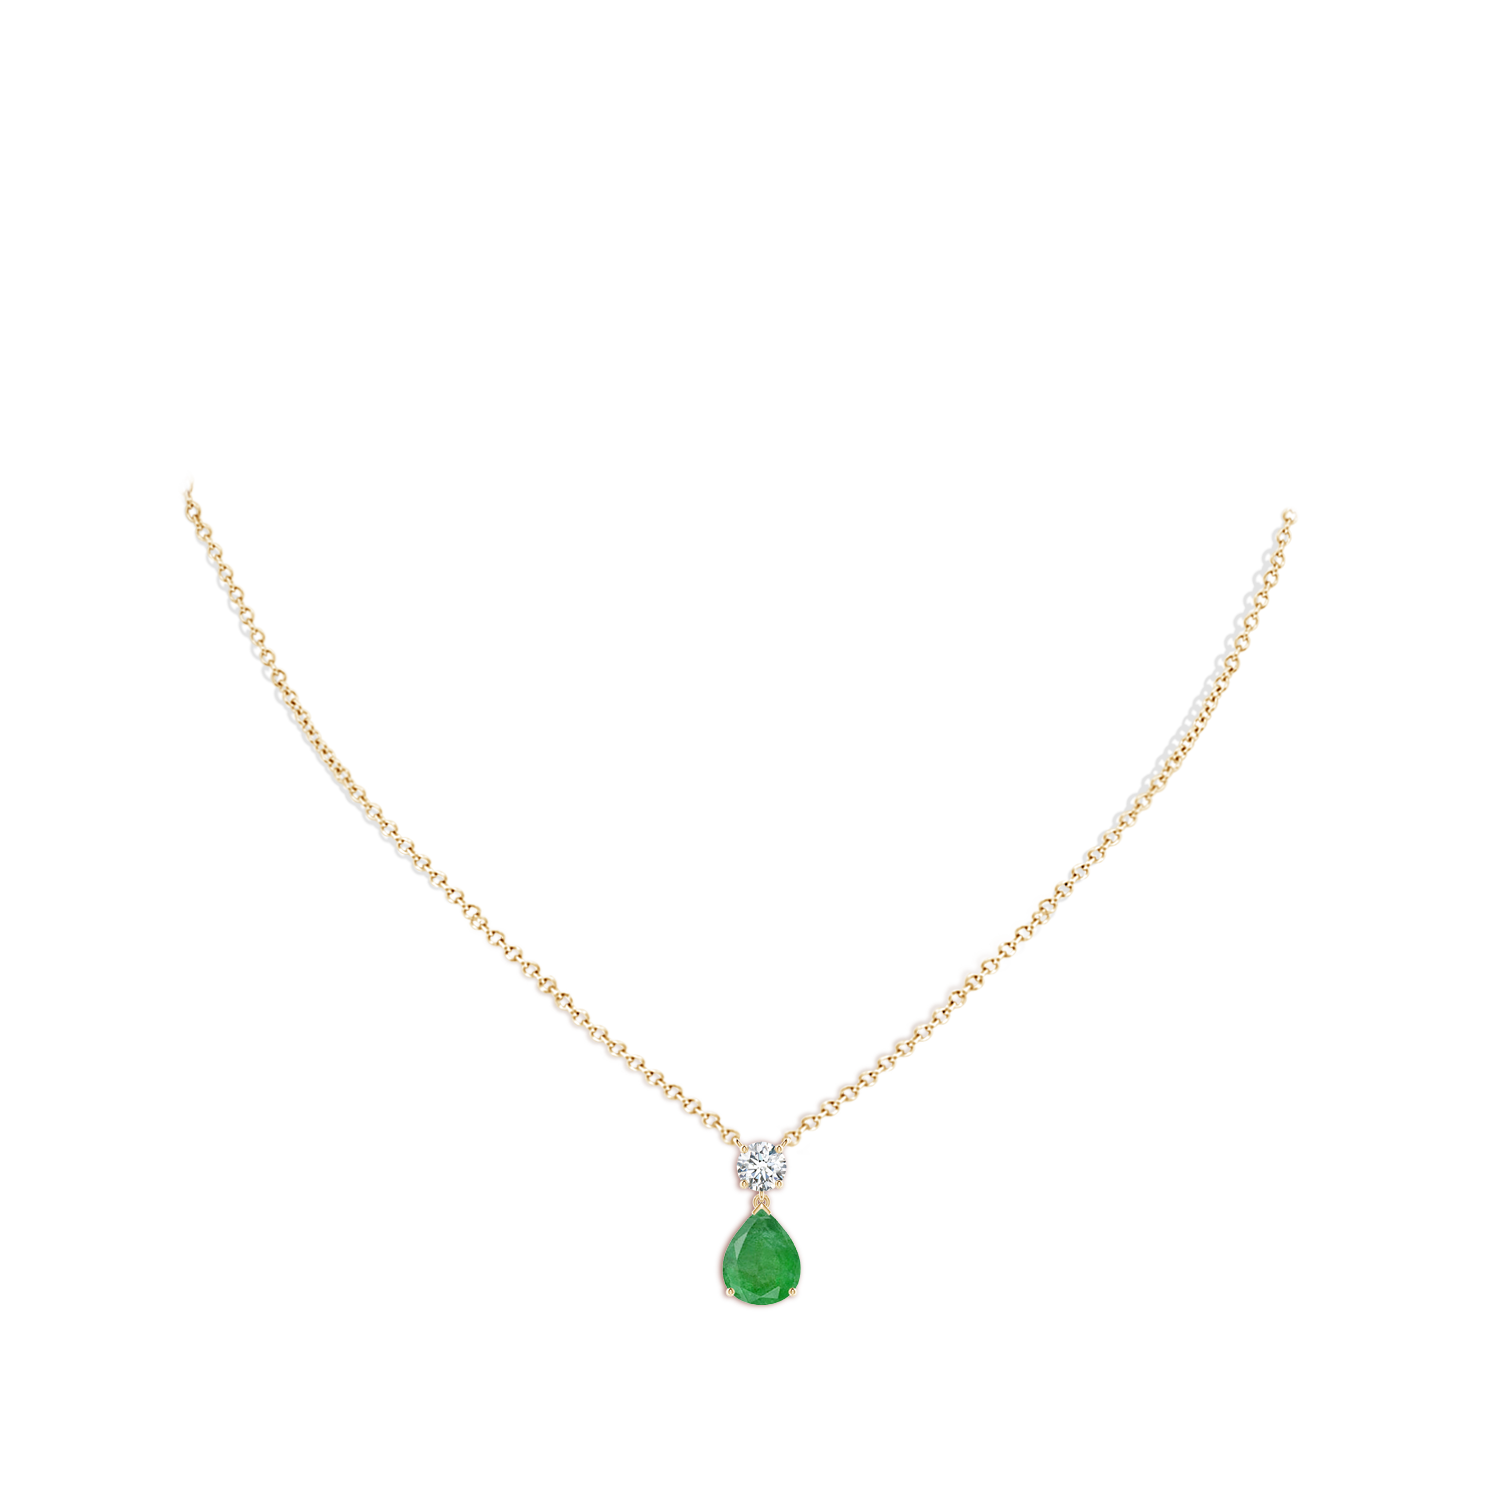 A - Emerald / 3 CT / 14 KT Yellow Gold